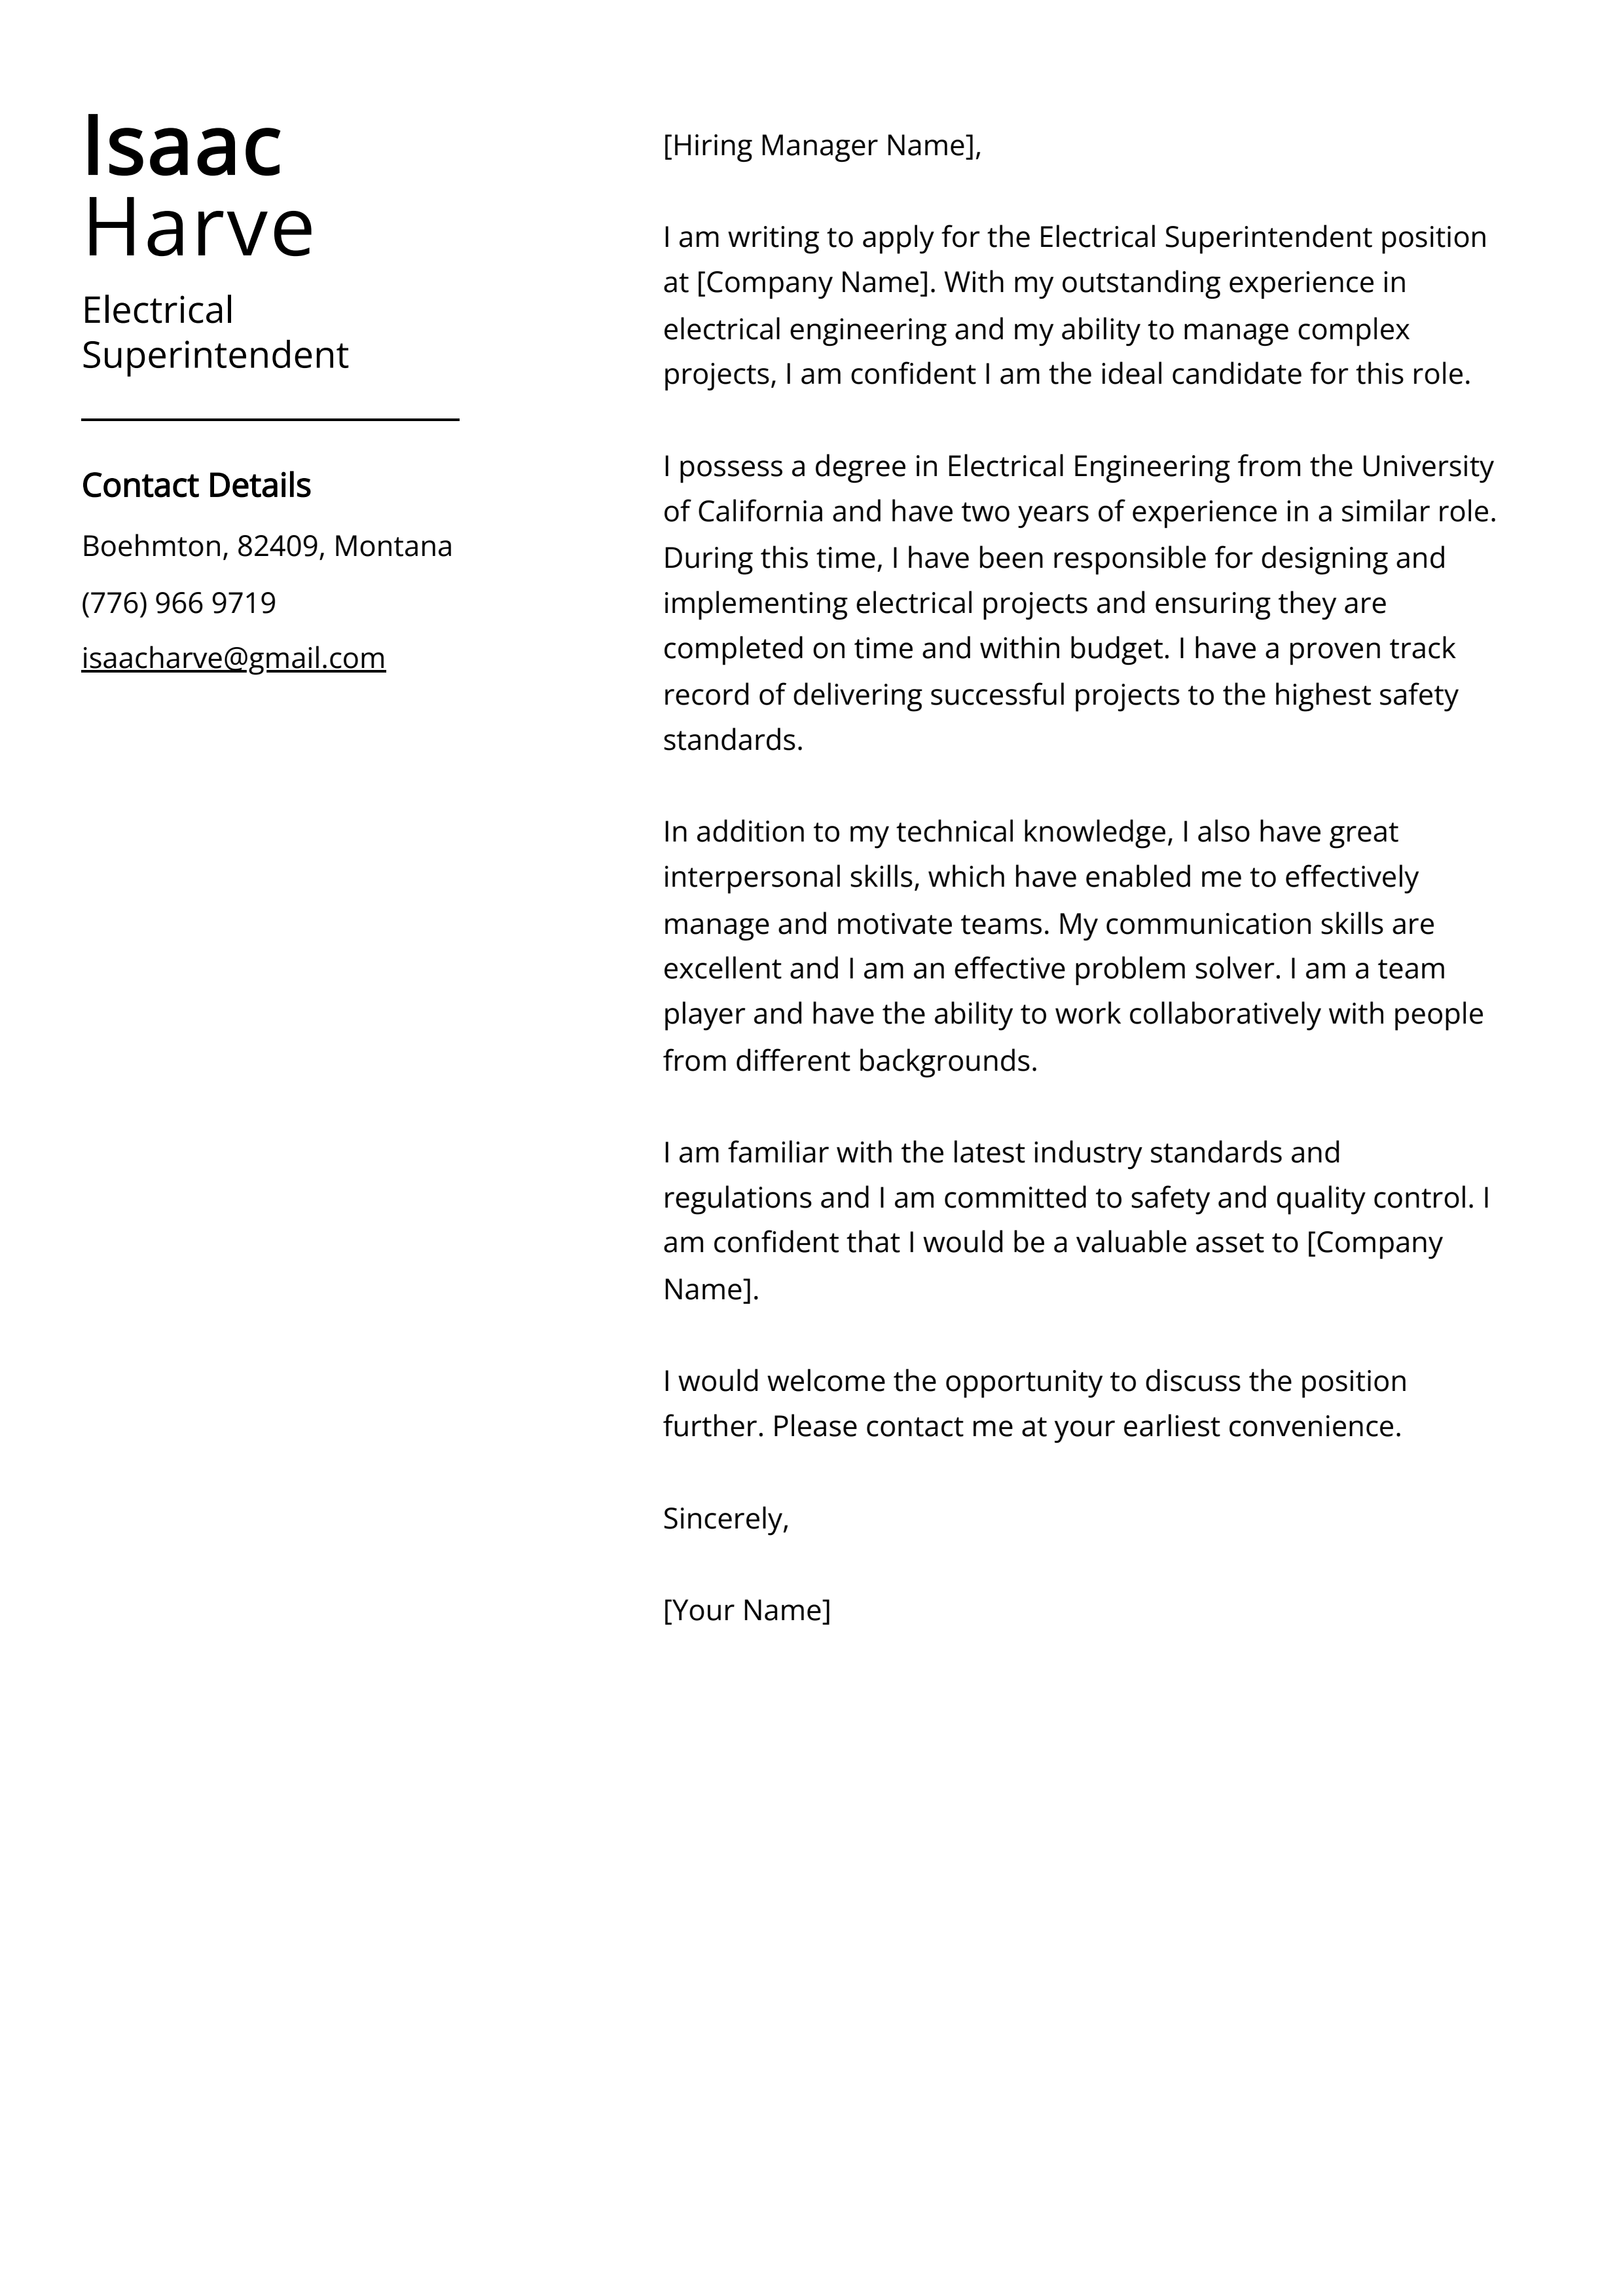 Electrical Superintendent Cover Letter Example